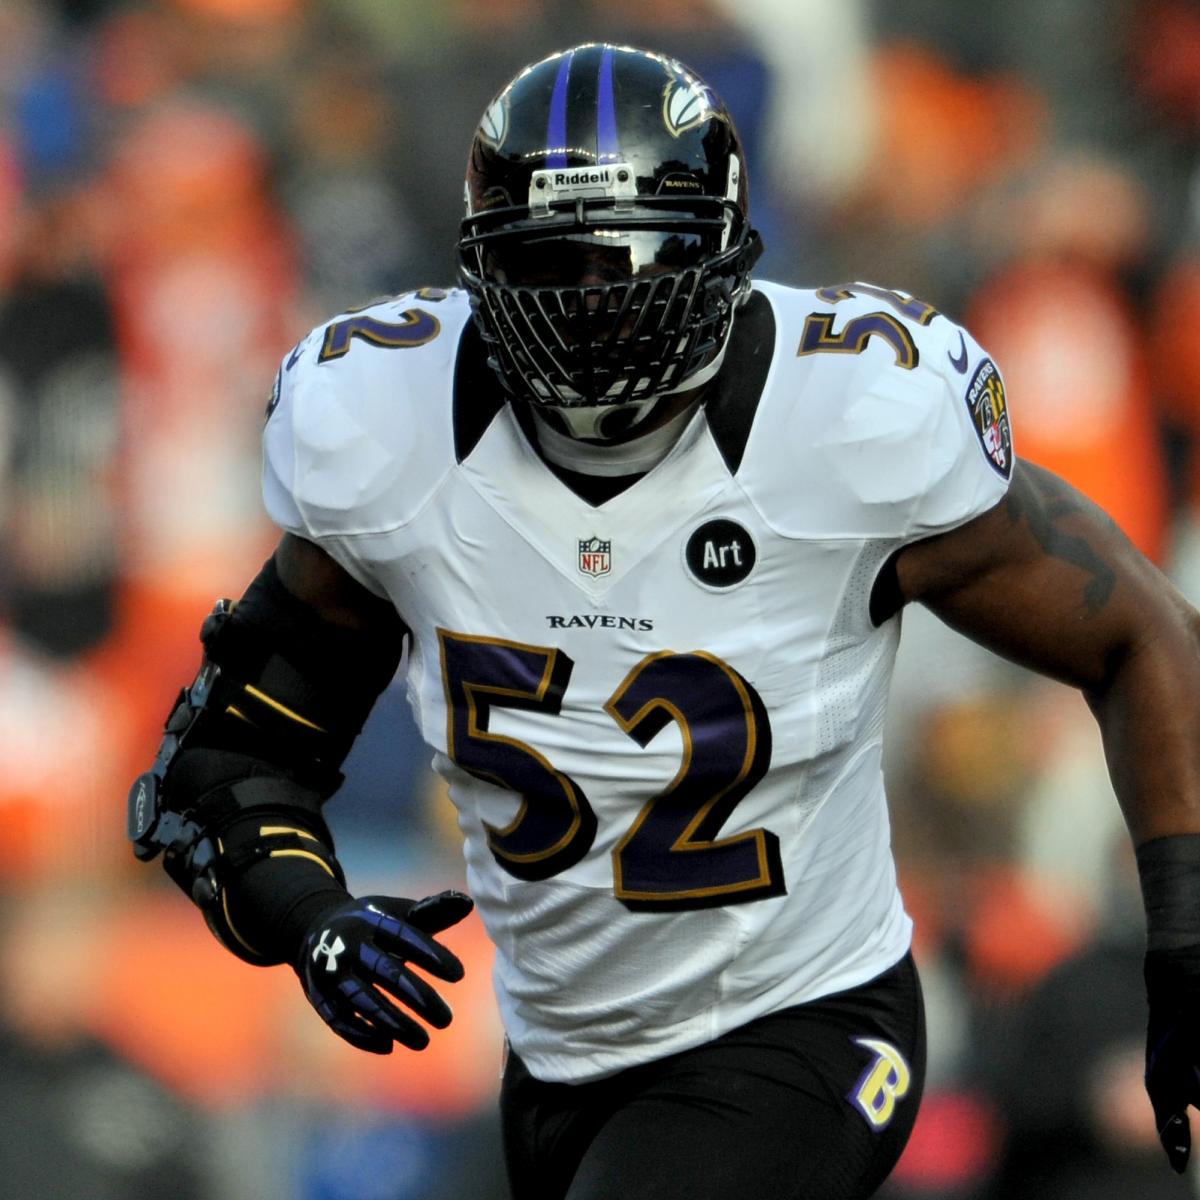 Super Bowl 2013: Ray Lewis more focused on 49ers than retirement - CBS News